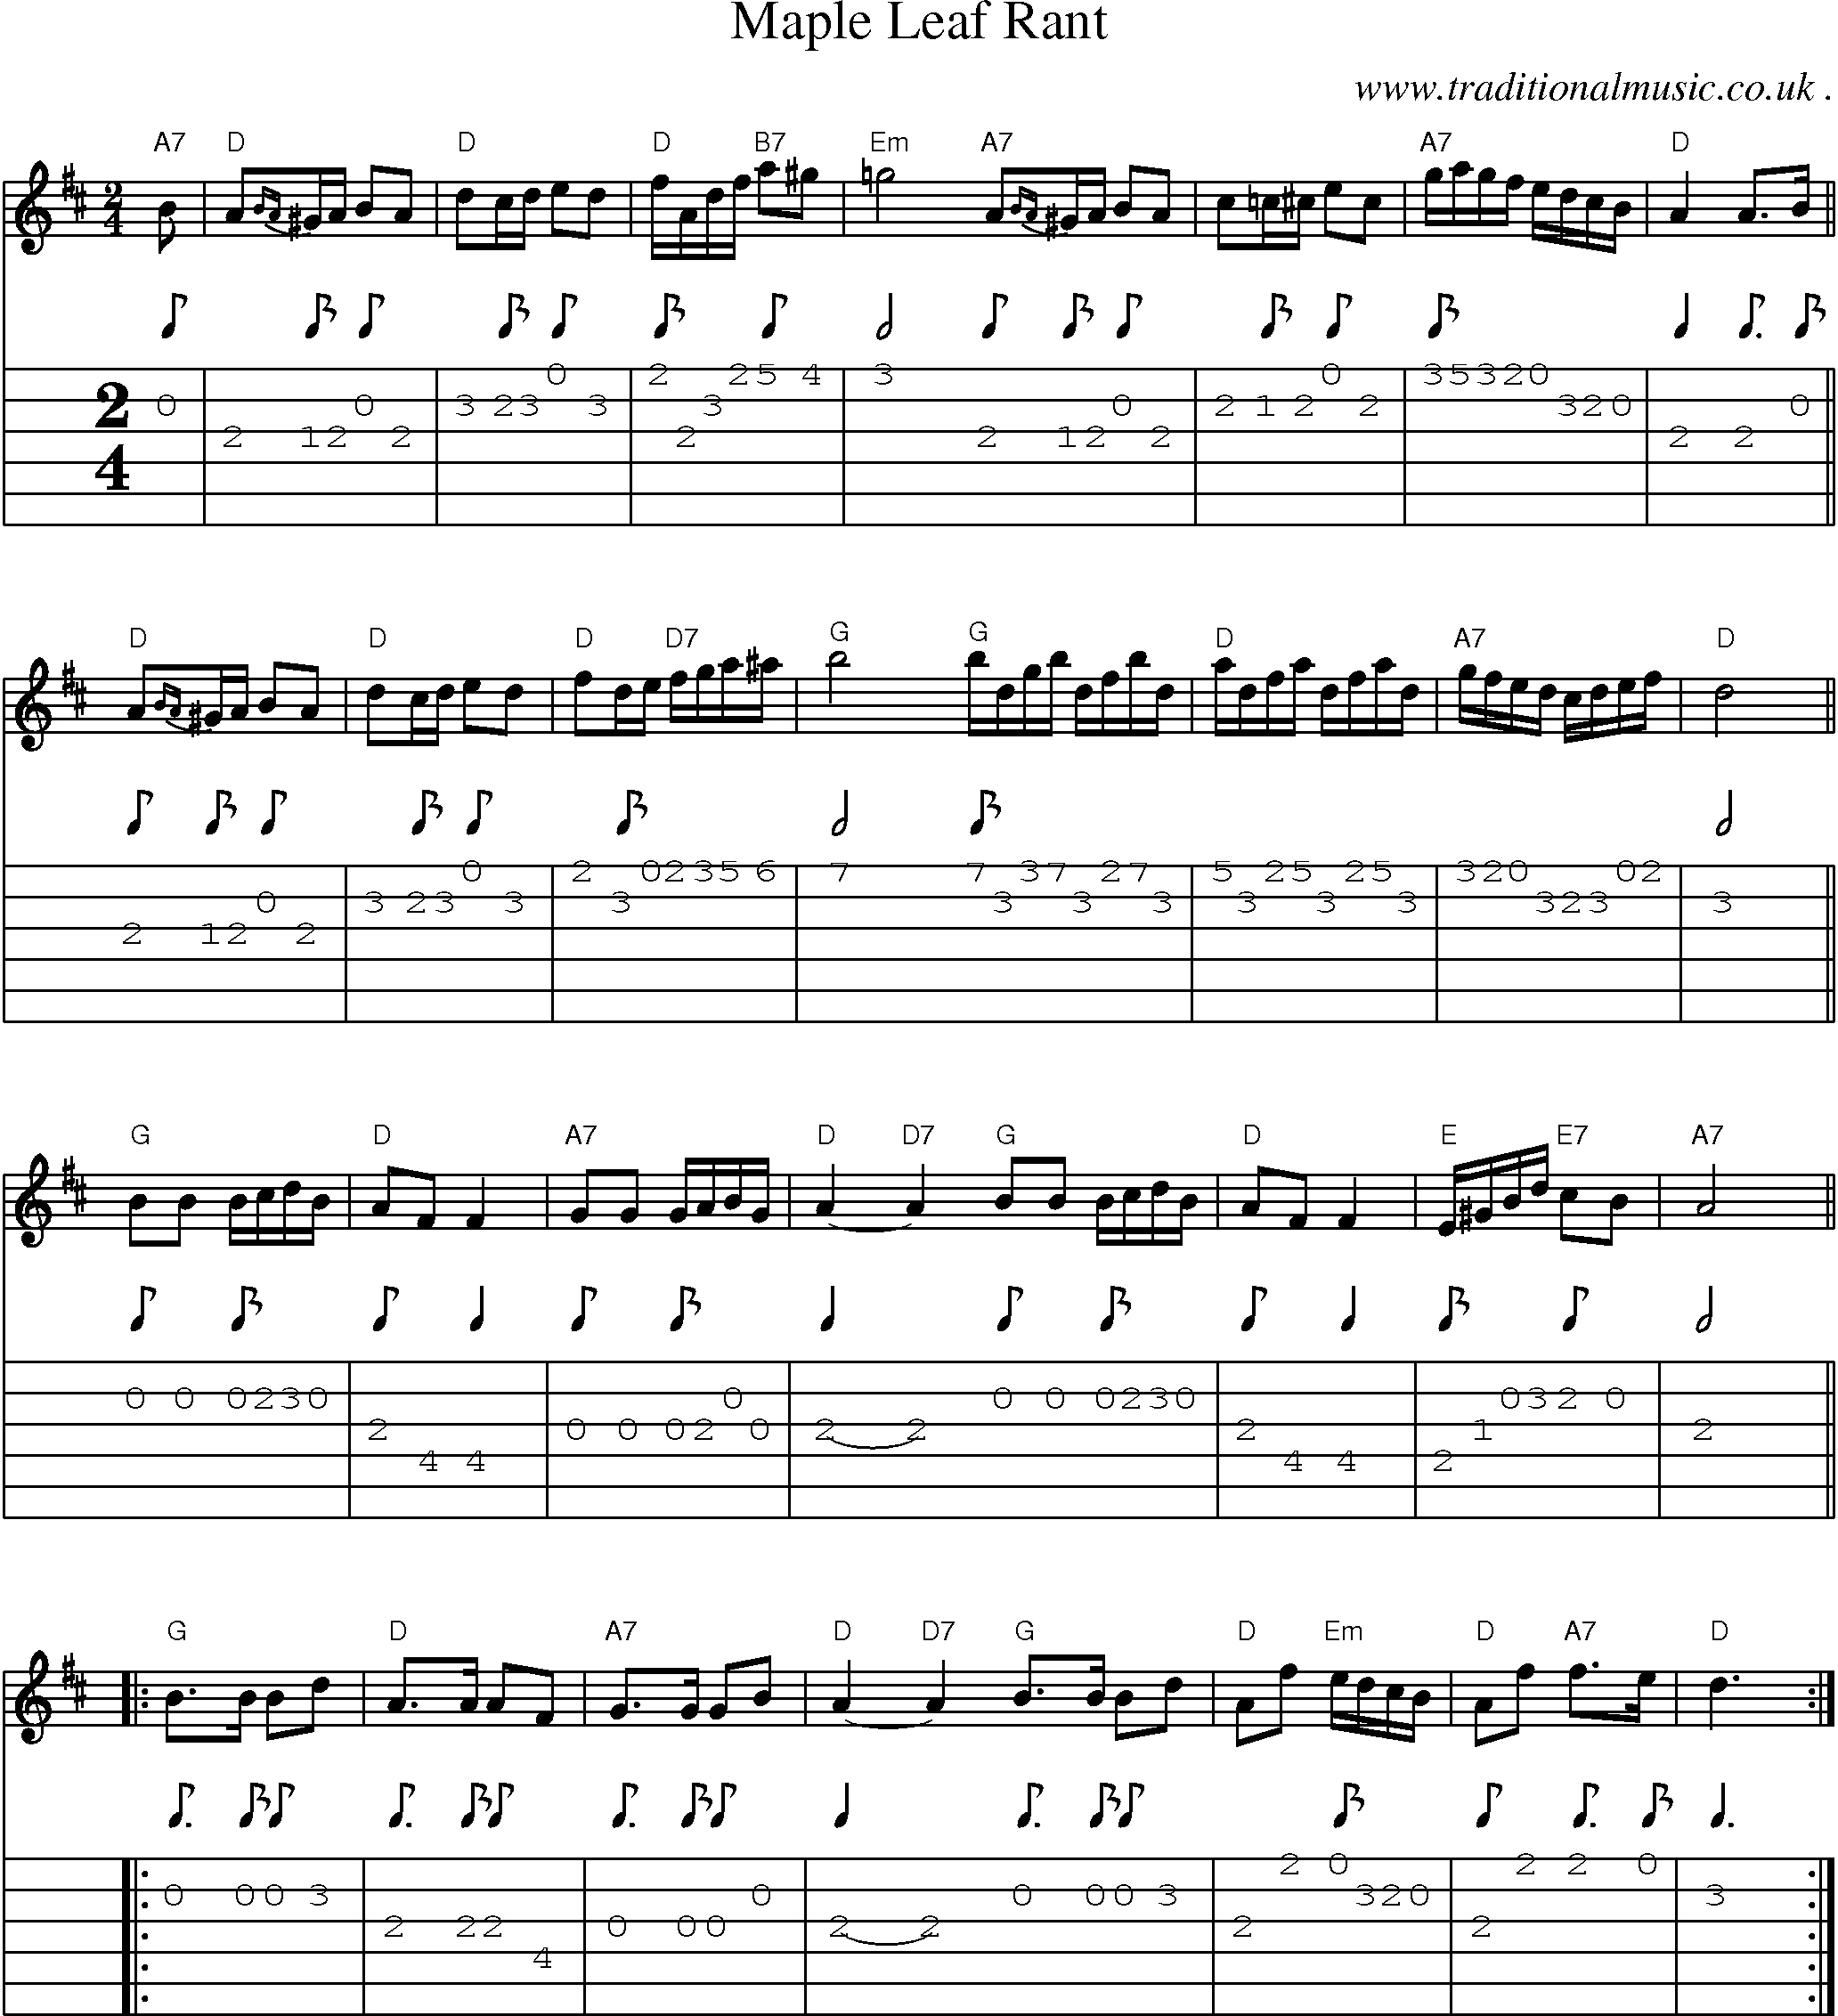 Sheet-music  score, Chords and Guitar Tabs for Maple Leaf Rant